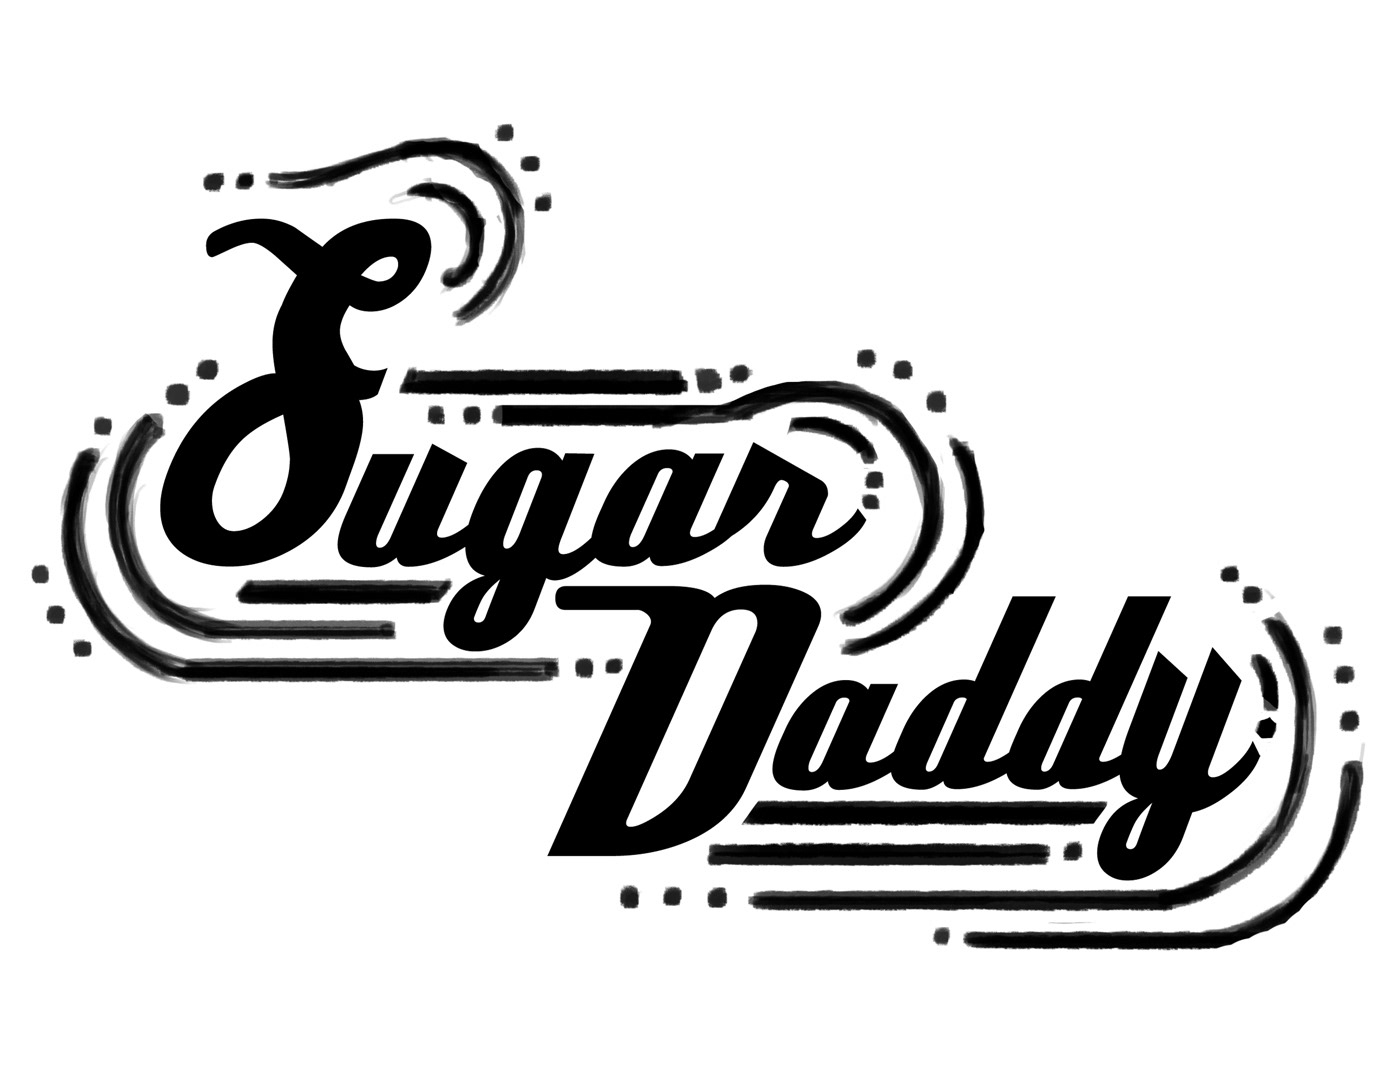 sugar daddy Frosting Food  typography   ILLUSTRATION  letterforms